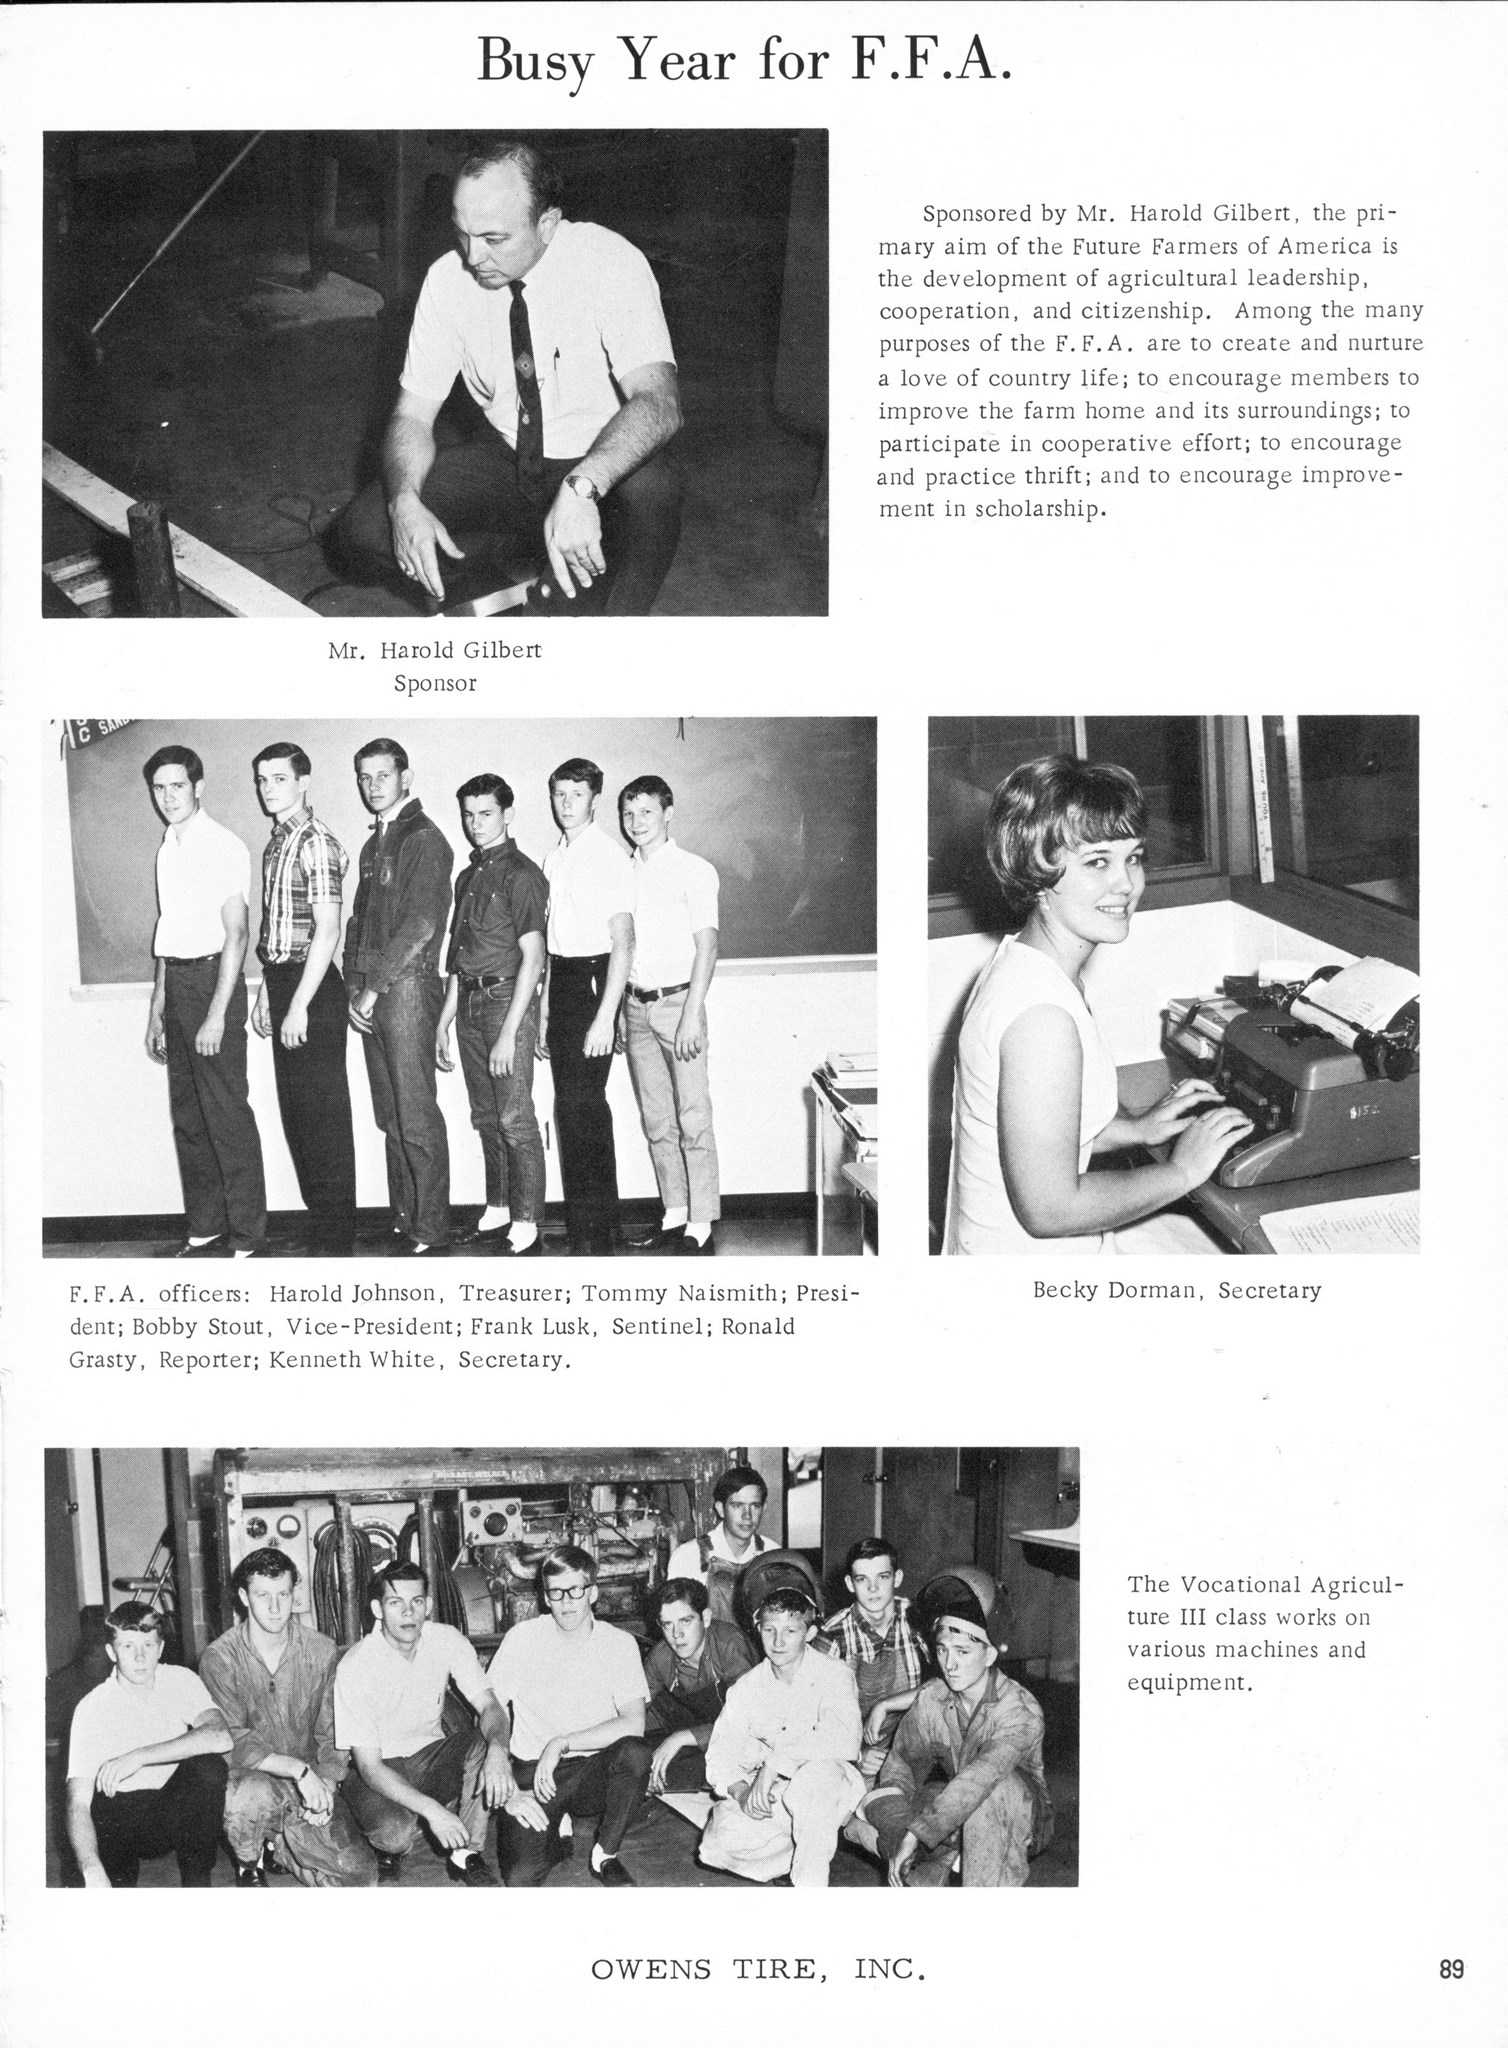 ../../../Images/Large/1967/Arclight-1967-pg0089.jpg